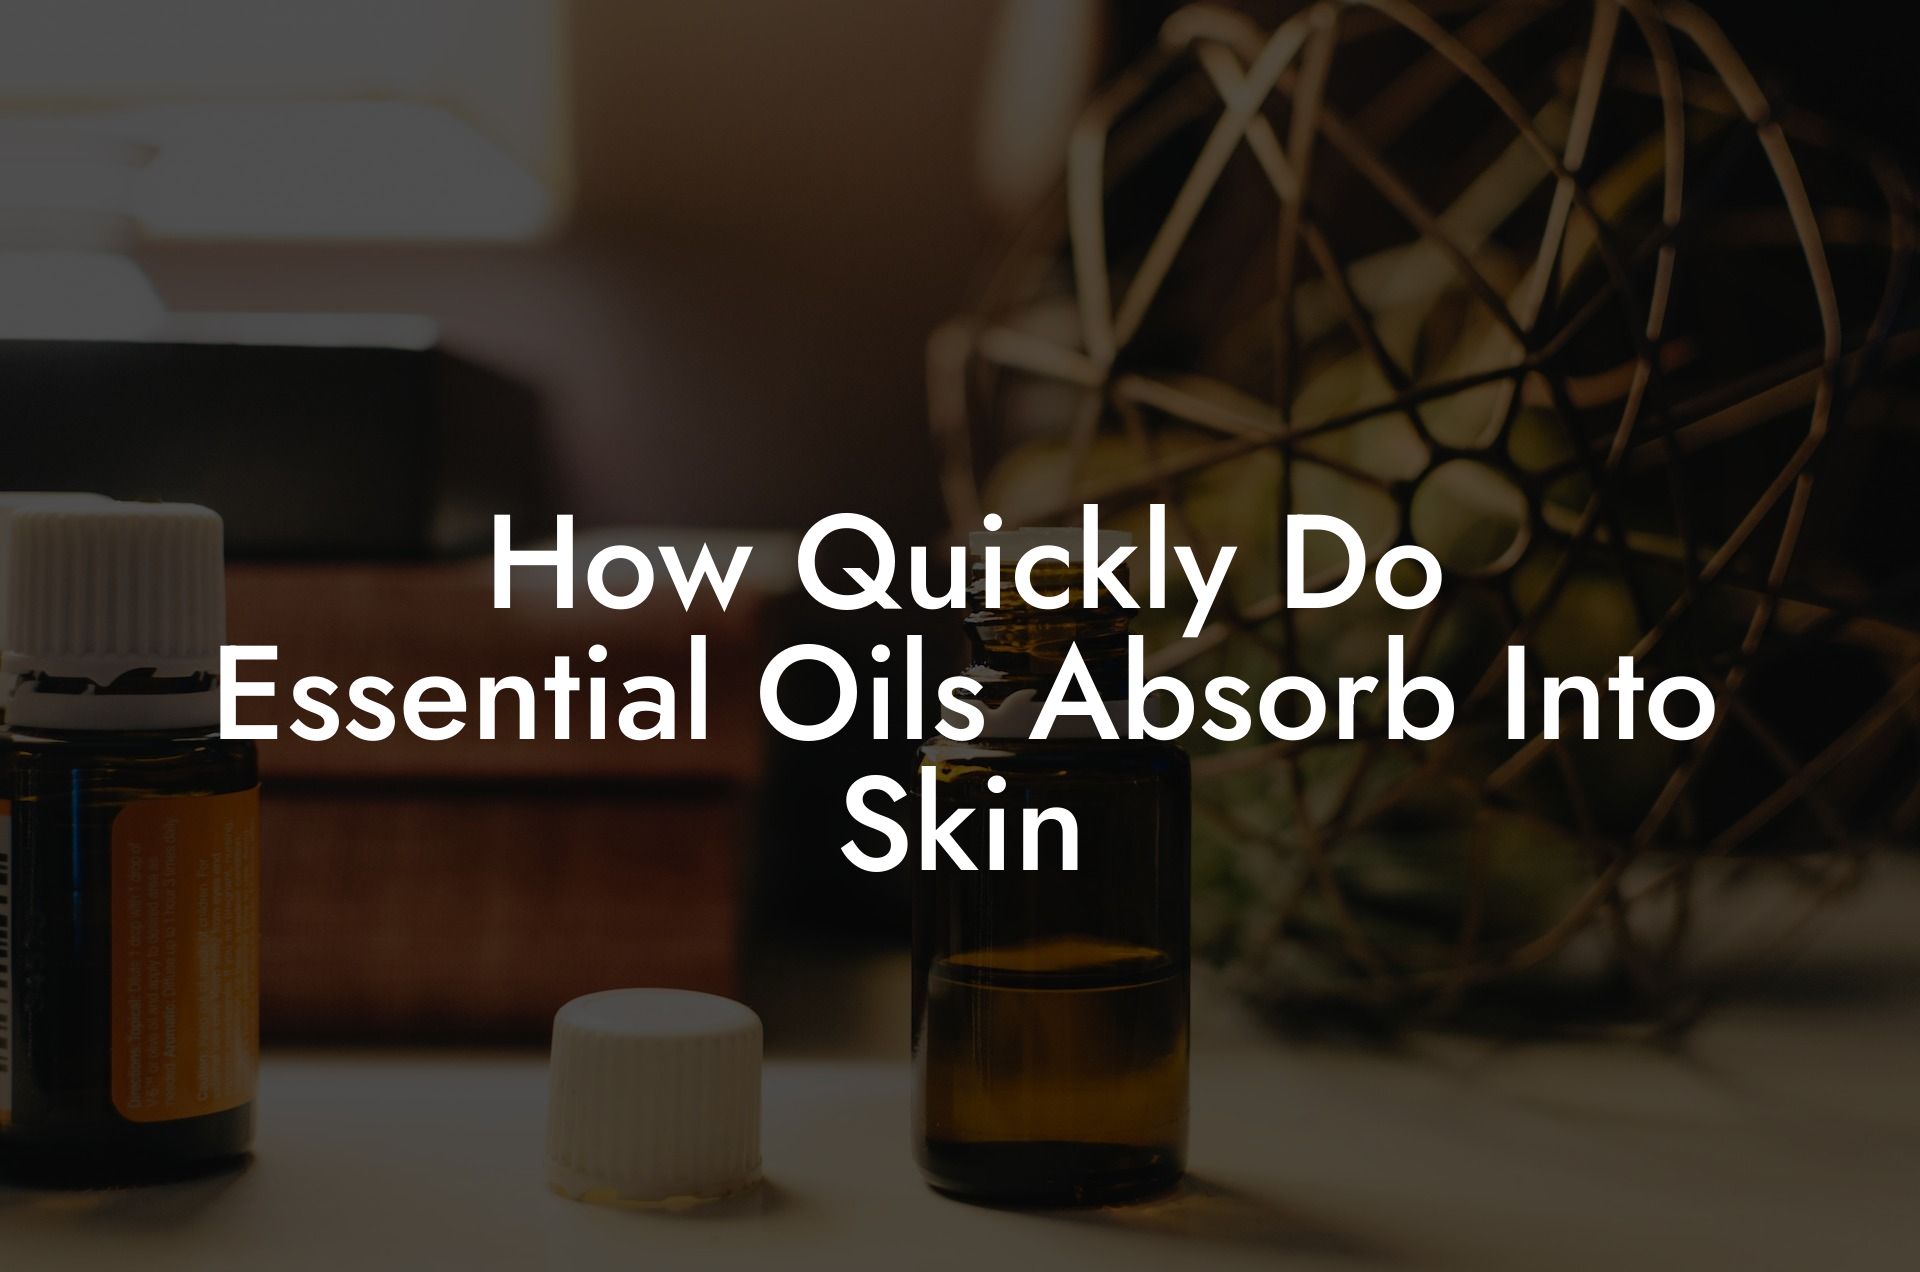 How Quickly Do Essential Oils Absorb Into Skin